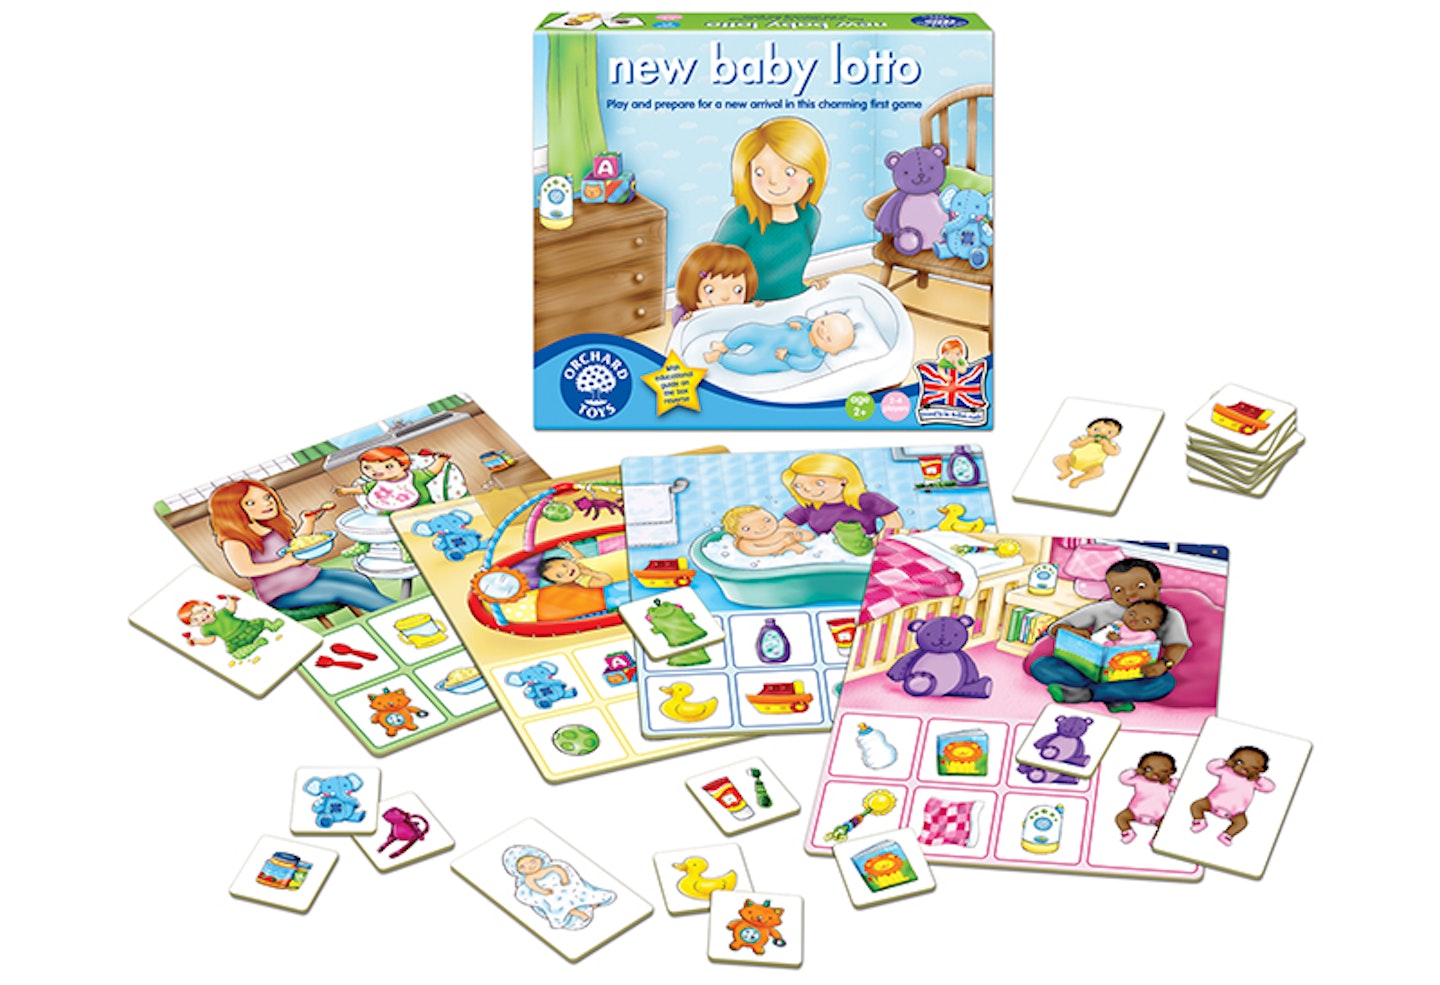 orchard-toys-new-baby-lotto